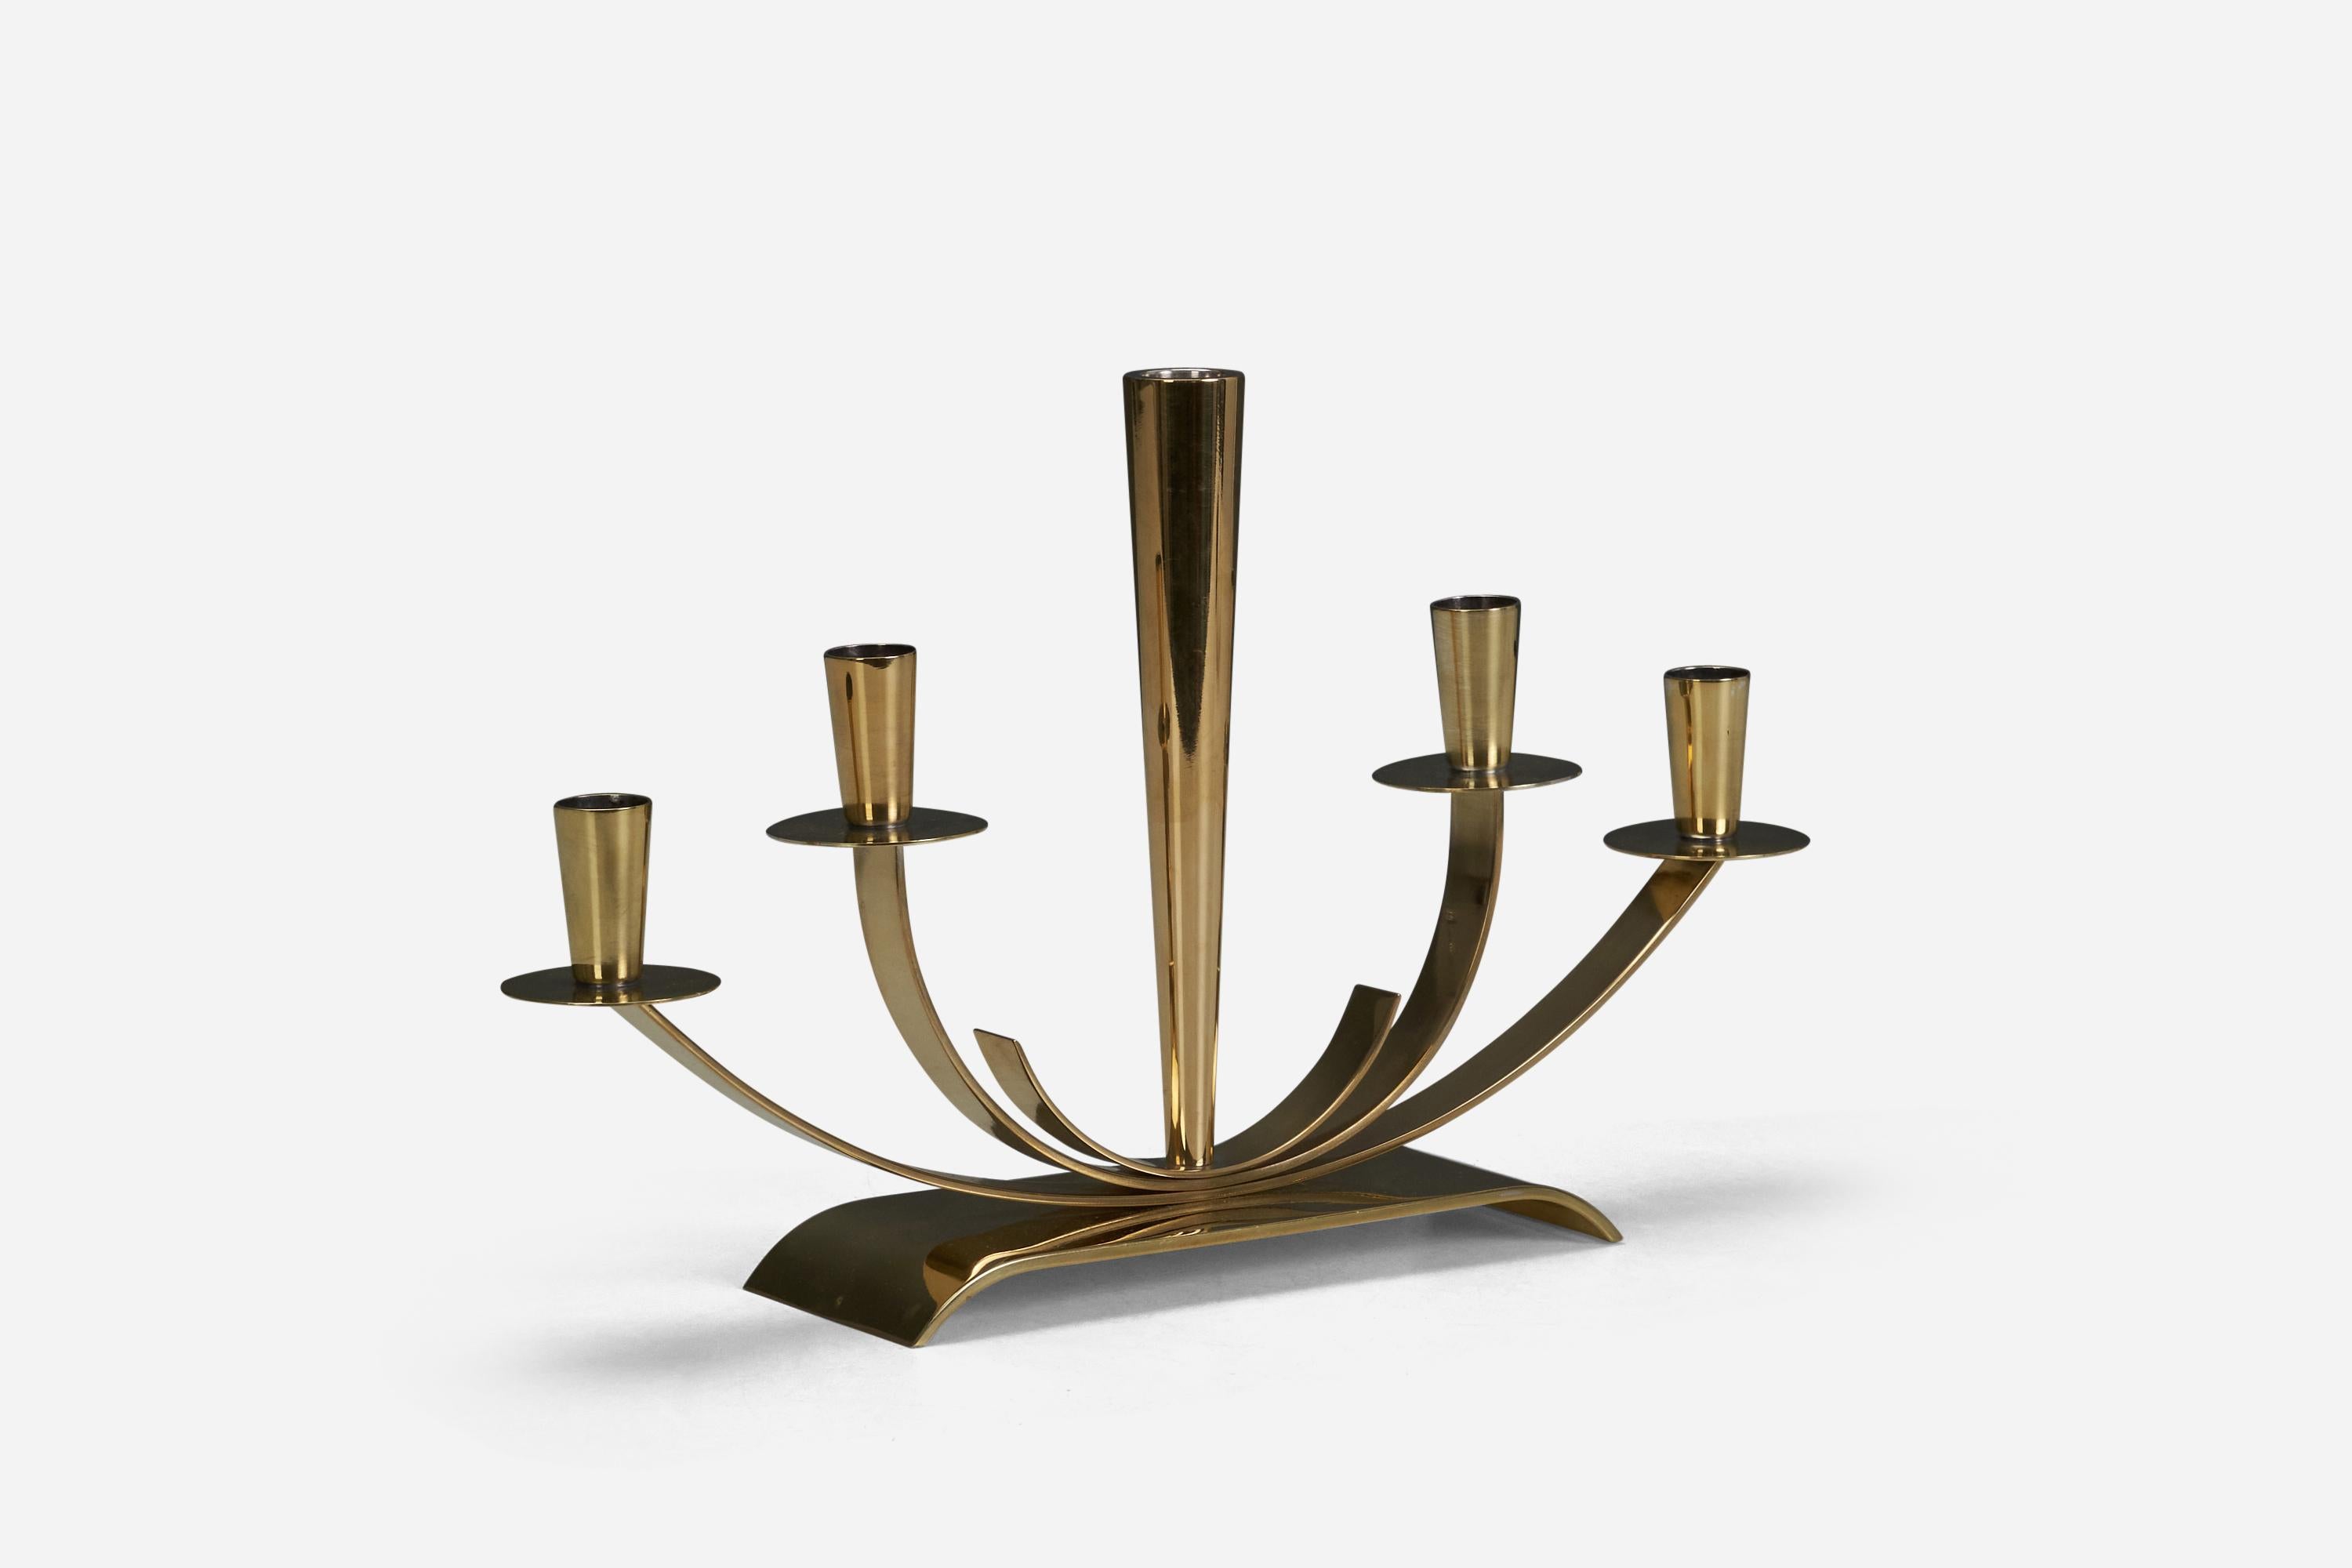 A brass candelabra designed and produced by Ystad Metall, Sweden, 1940s.